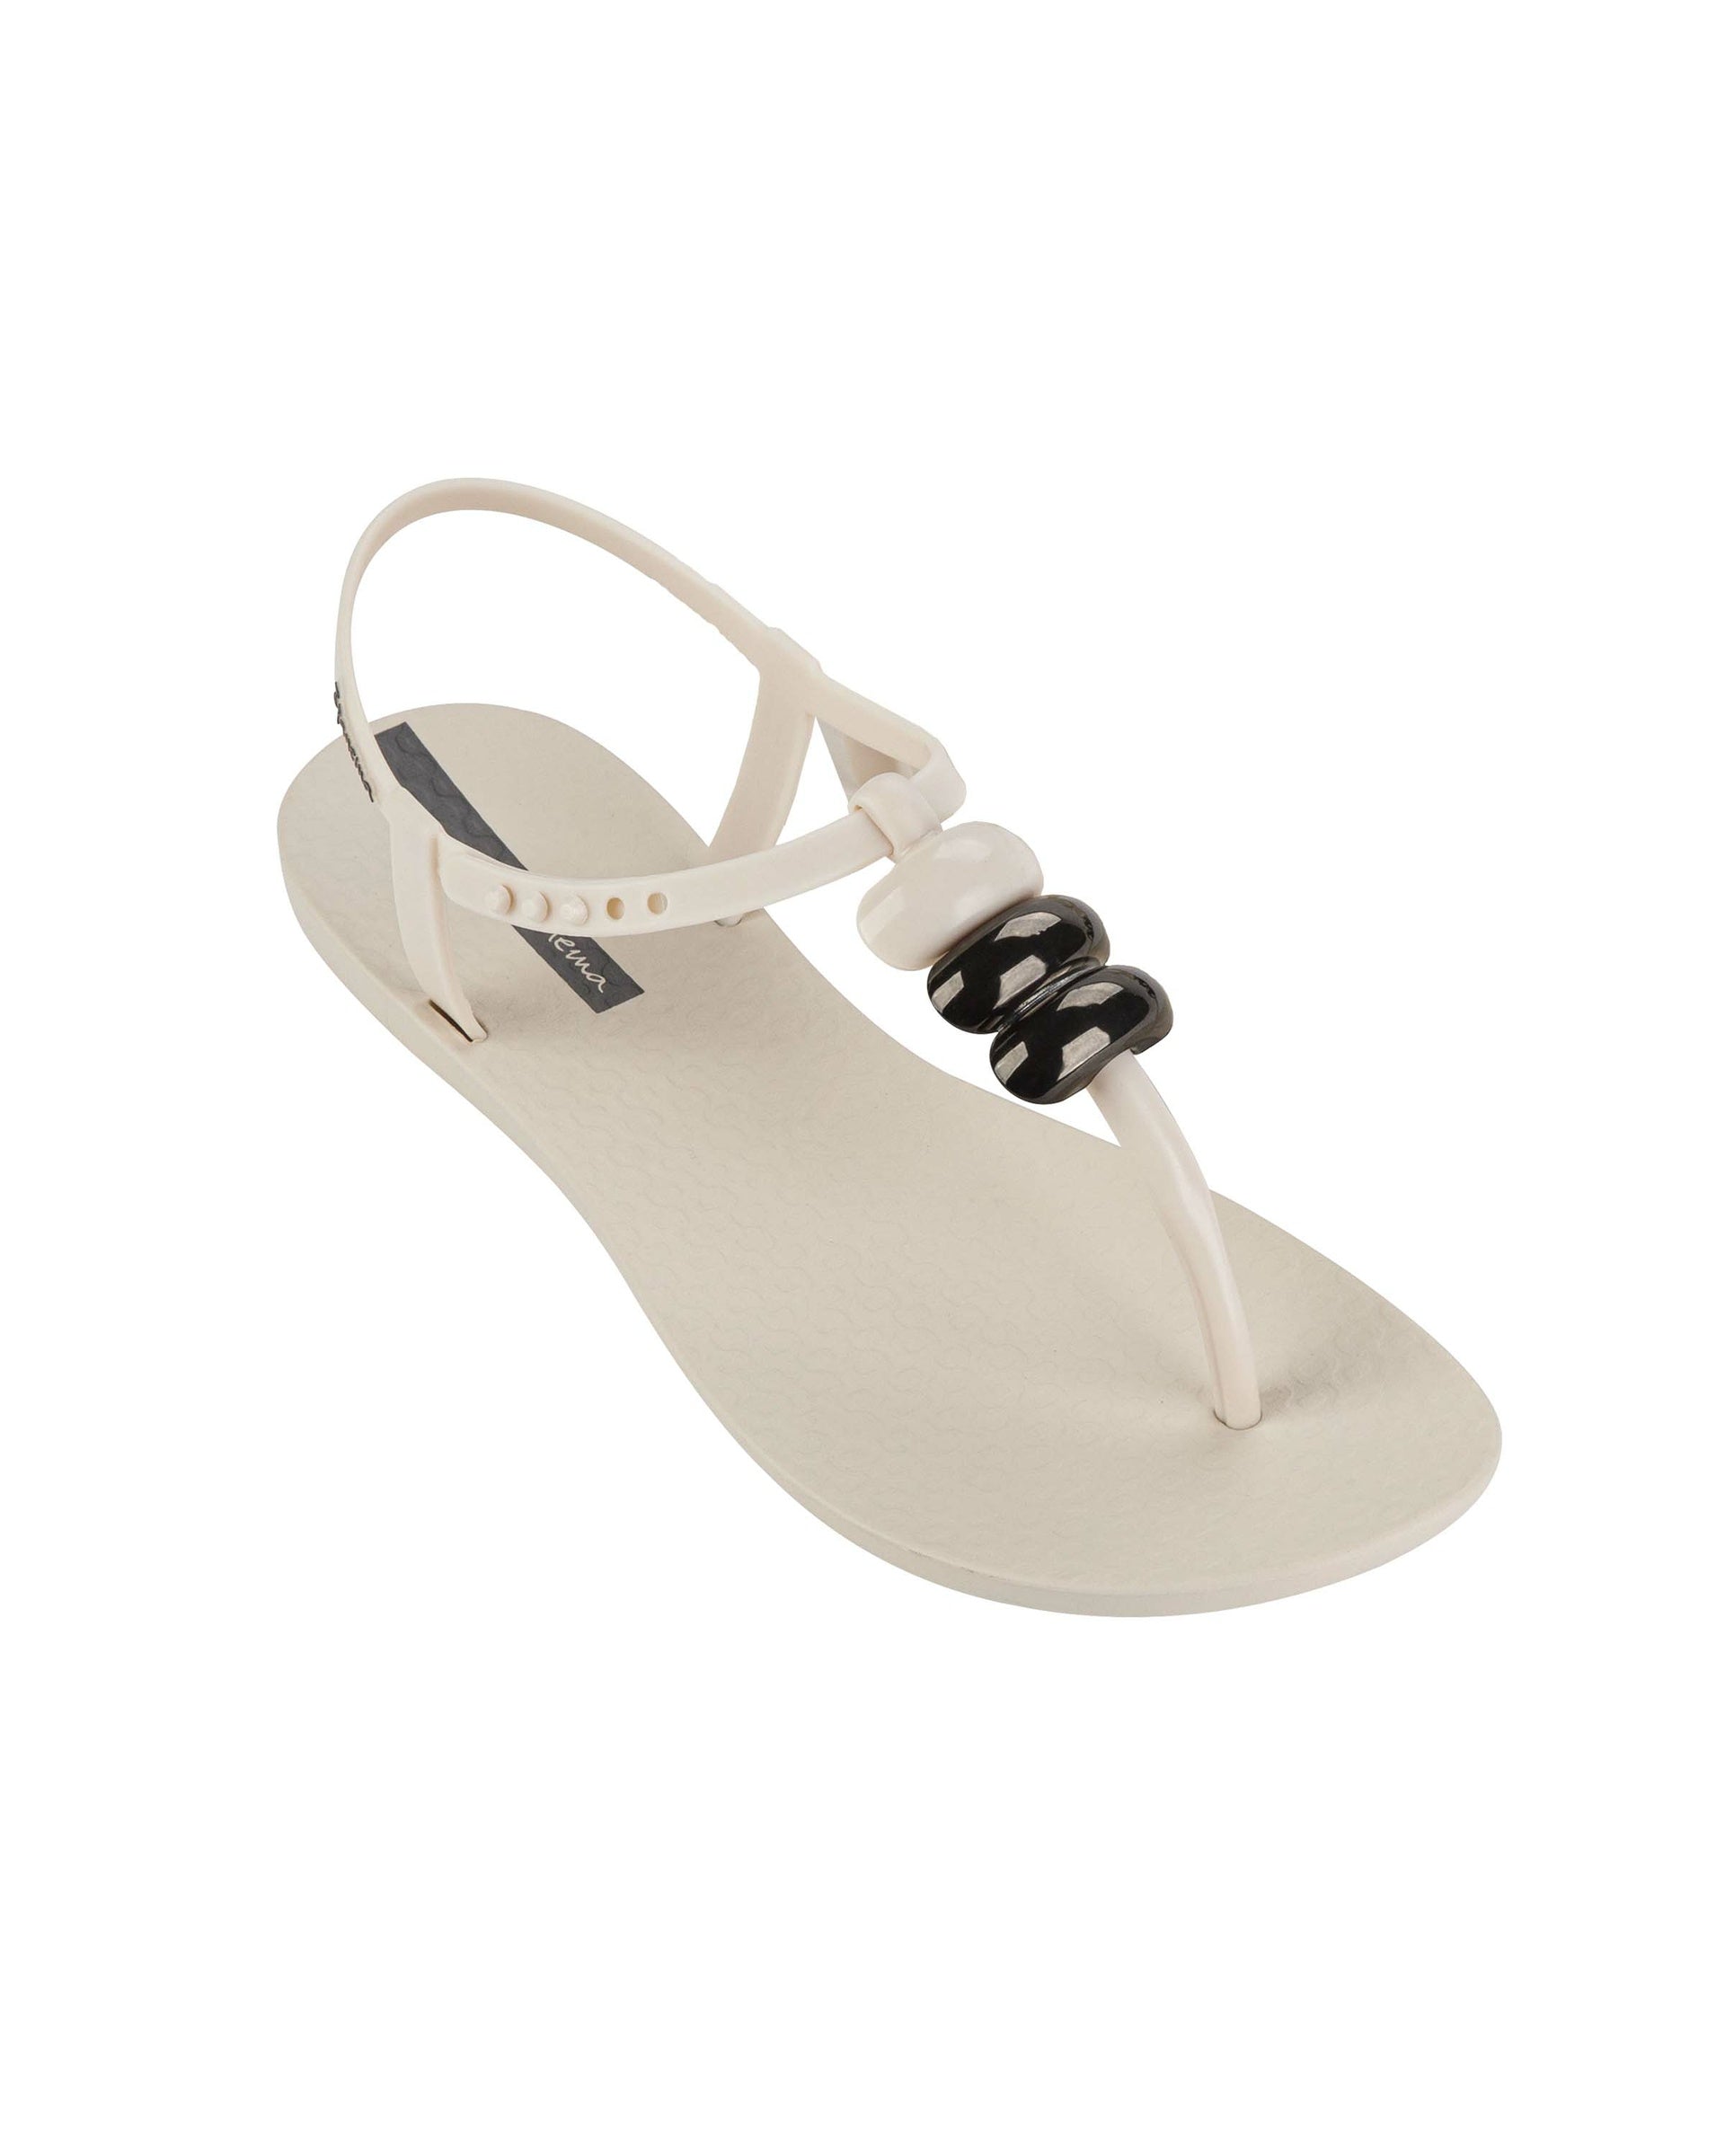 Angled view of a beige Ipanema Class women's sandal with 3 bubble baubles on the t-strap.